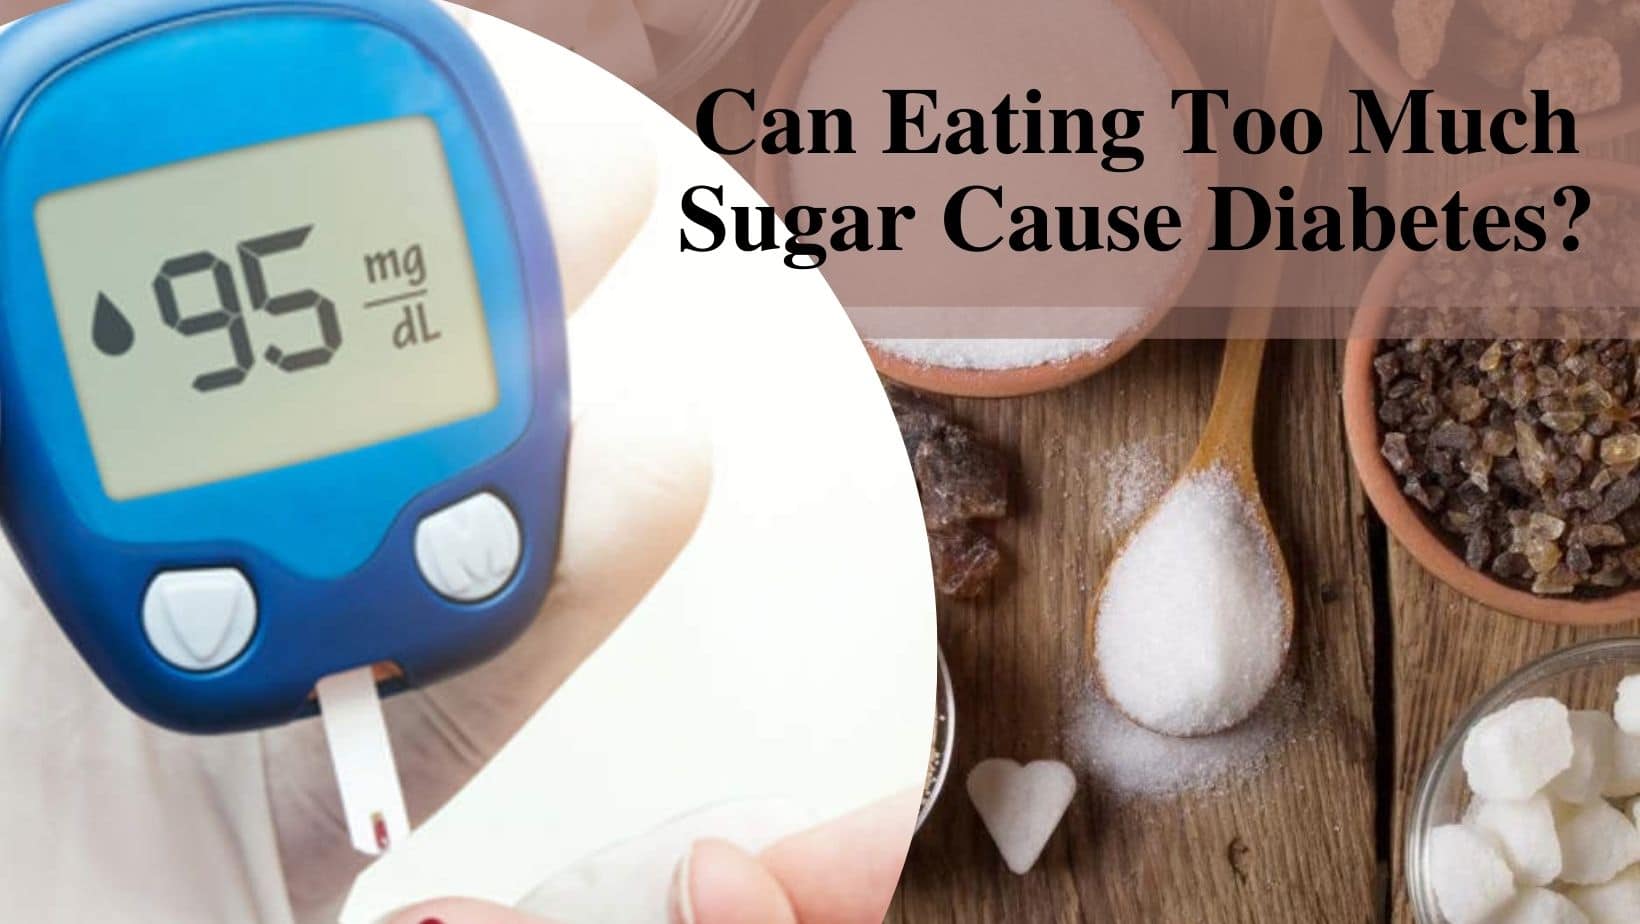 Can Eating Too Much Sugar Cause Type-2 Diabetes?